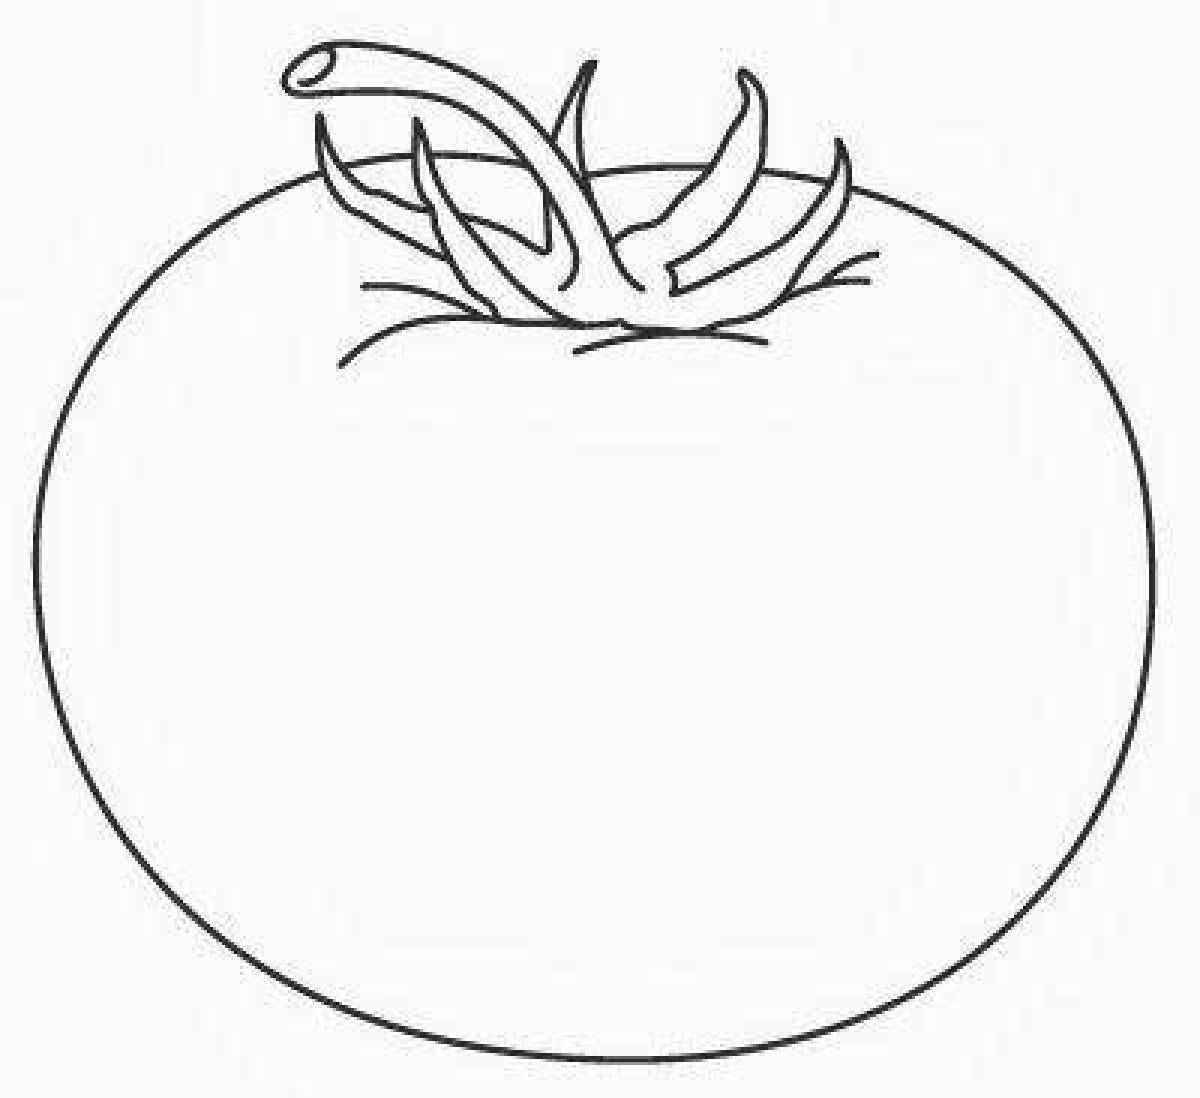 Intriguing tomato coloring page for kids